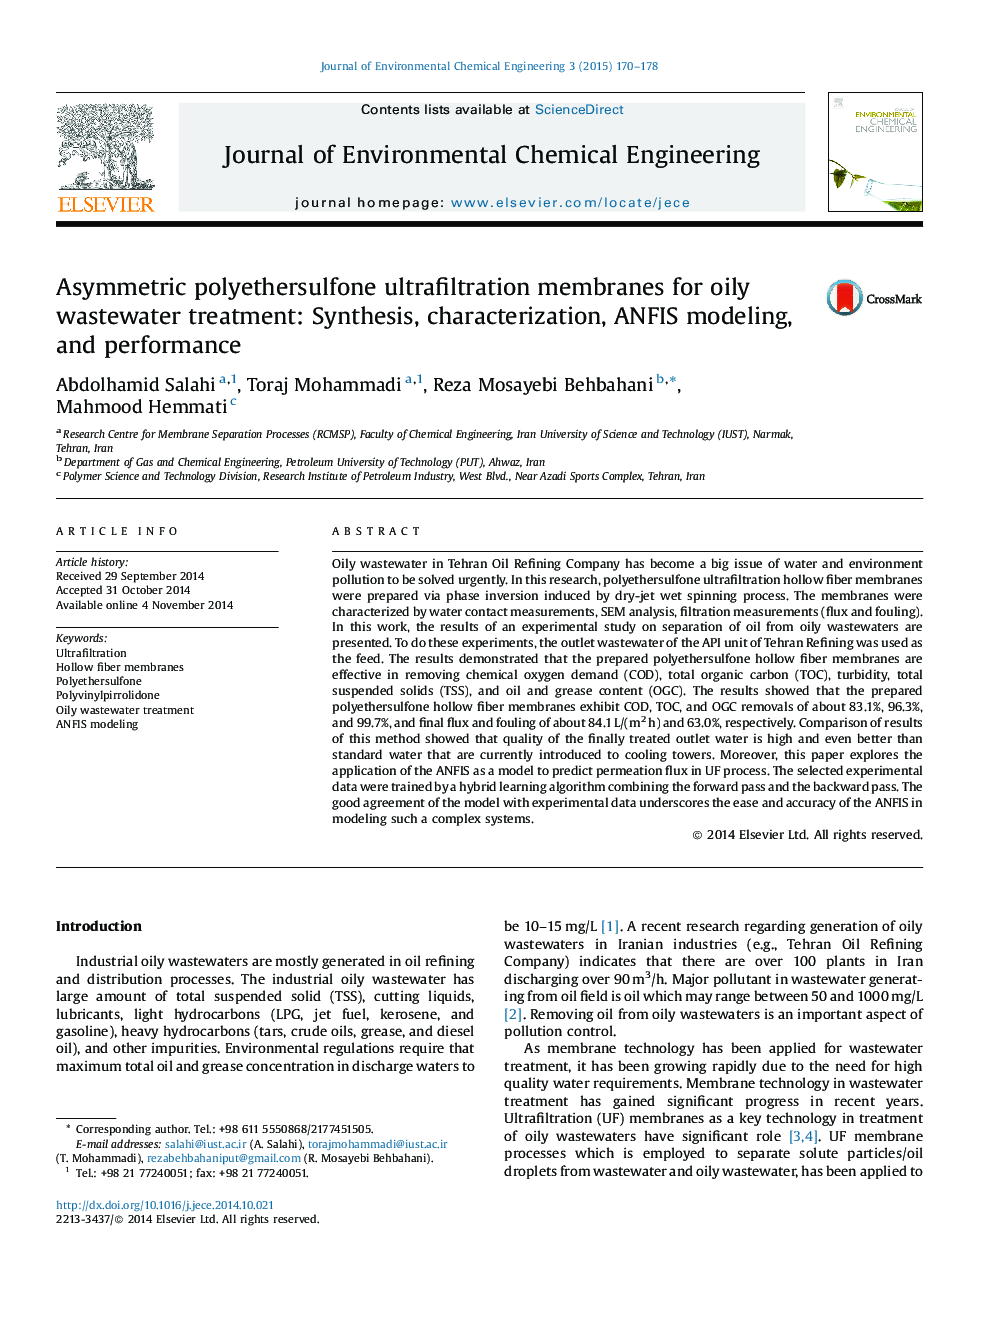 Asymmetric polyethersulfone ultrafiltration membranes for oily wastewater treatment: Synthesis, characterization, ANFIS modeling, and performance